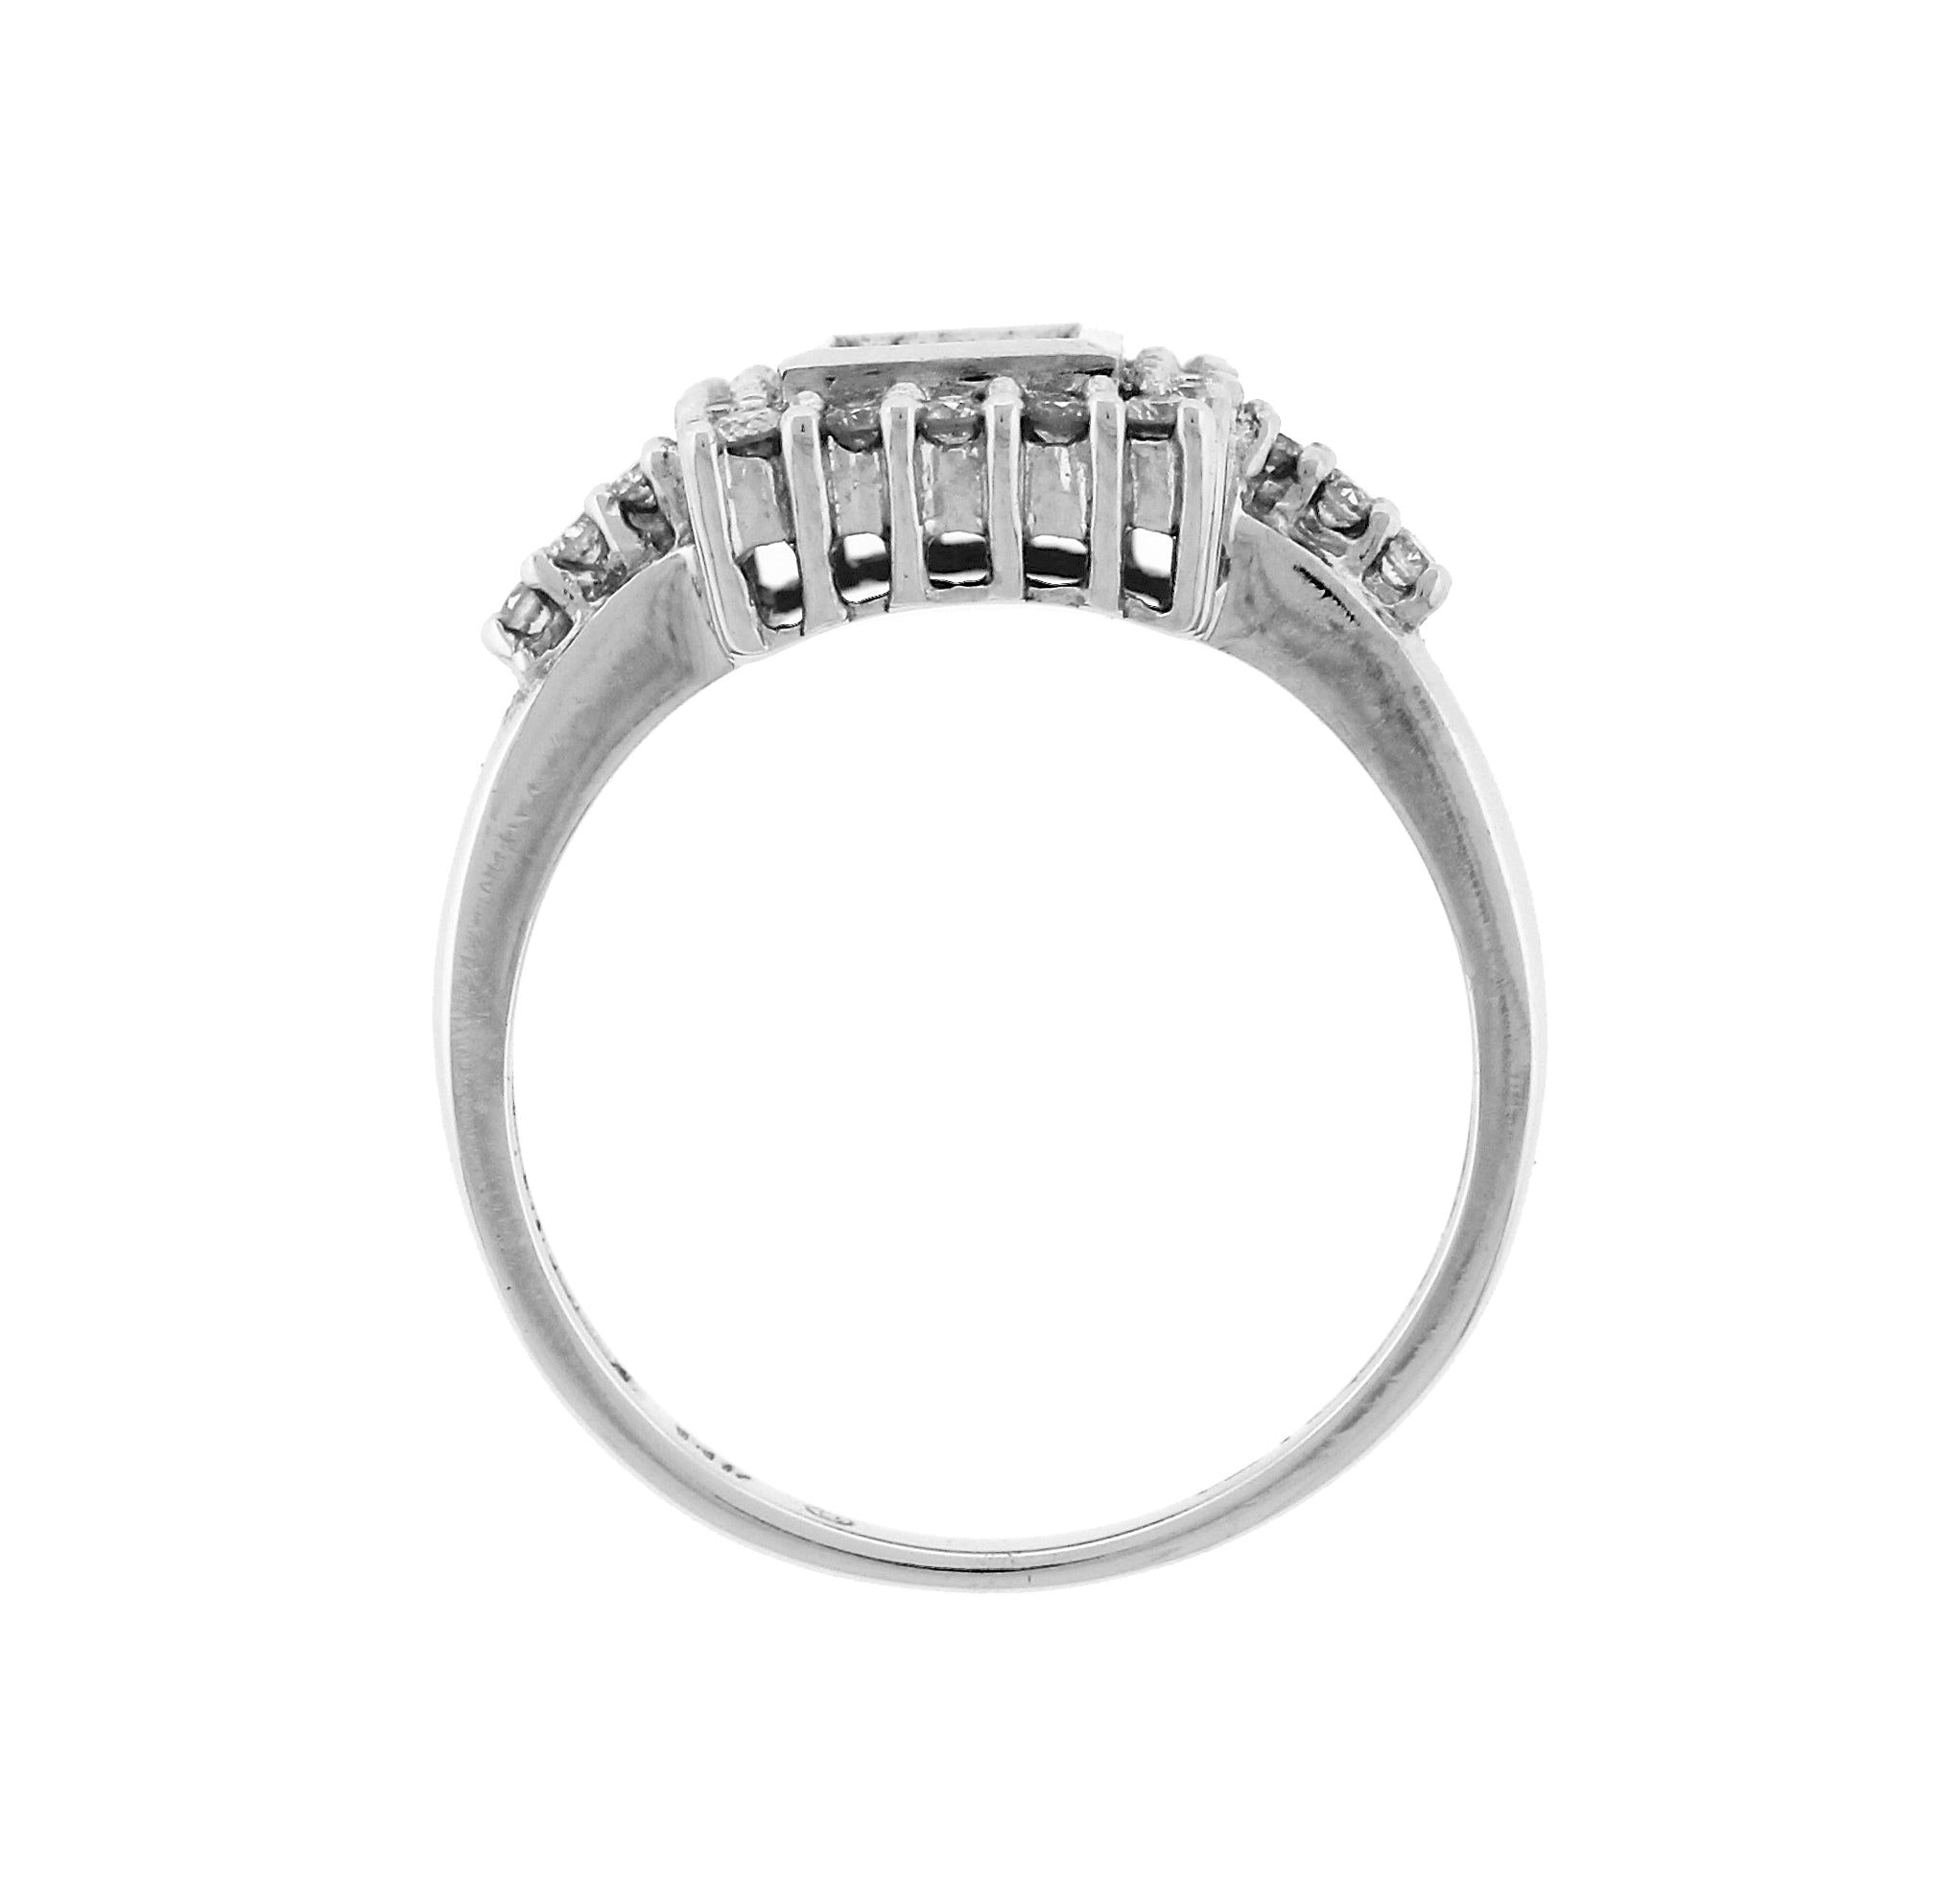 Invisible Setting 14K White Gold Diamond 0.50CTW Engagement Ring Size 7